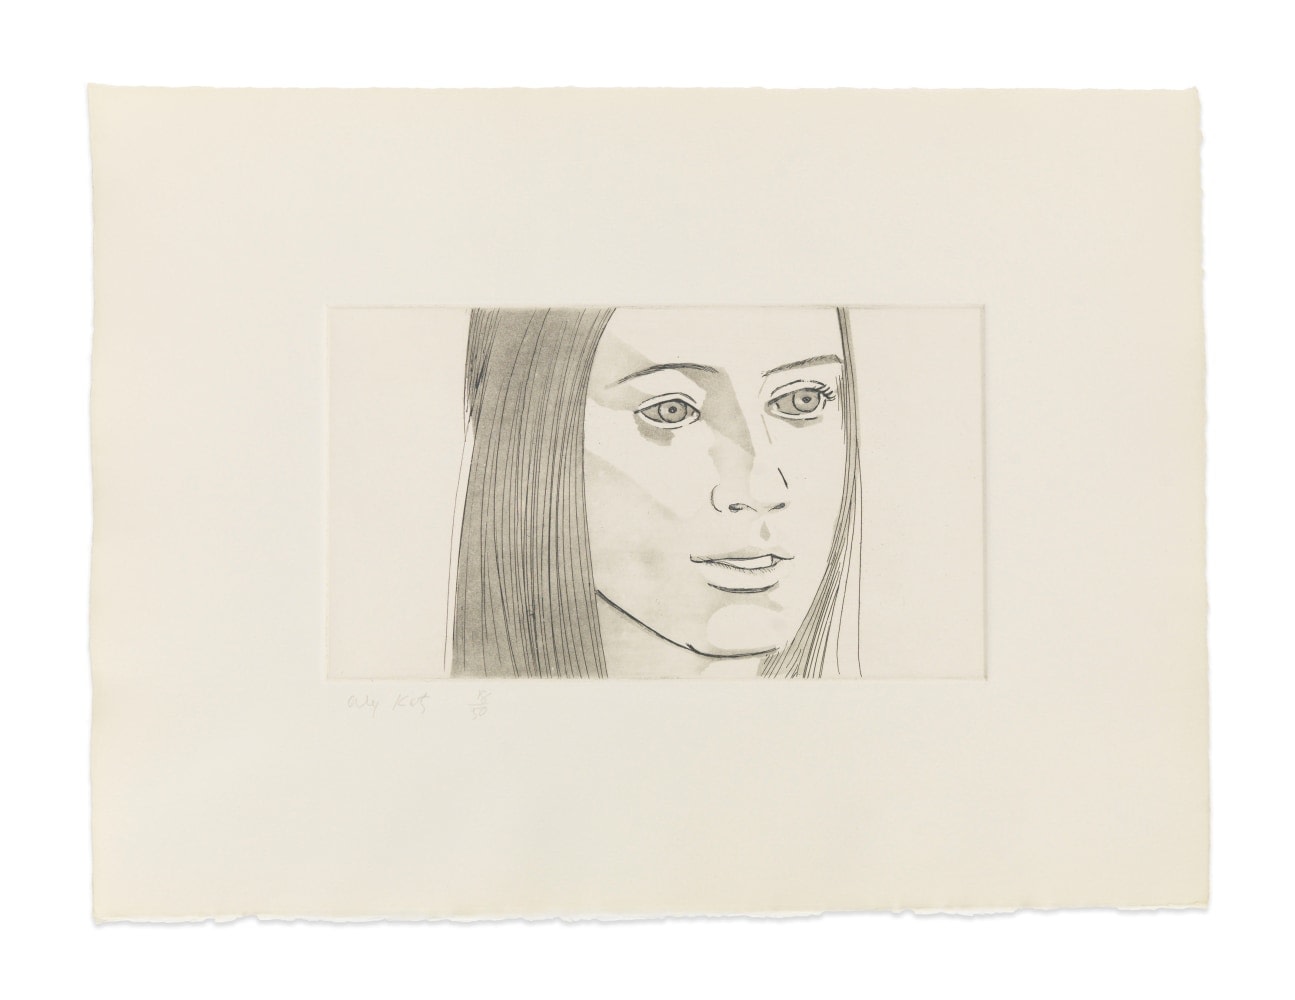 June Ekman&amp;rsquo;s Class: Mary, 1972

aquatint, edition of 50

11 1/8 x 15 in. / 28.3 x 38.1 cm